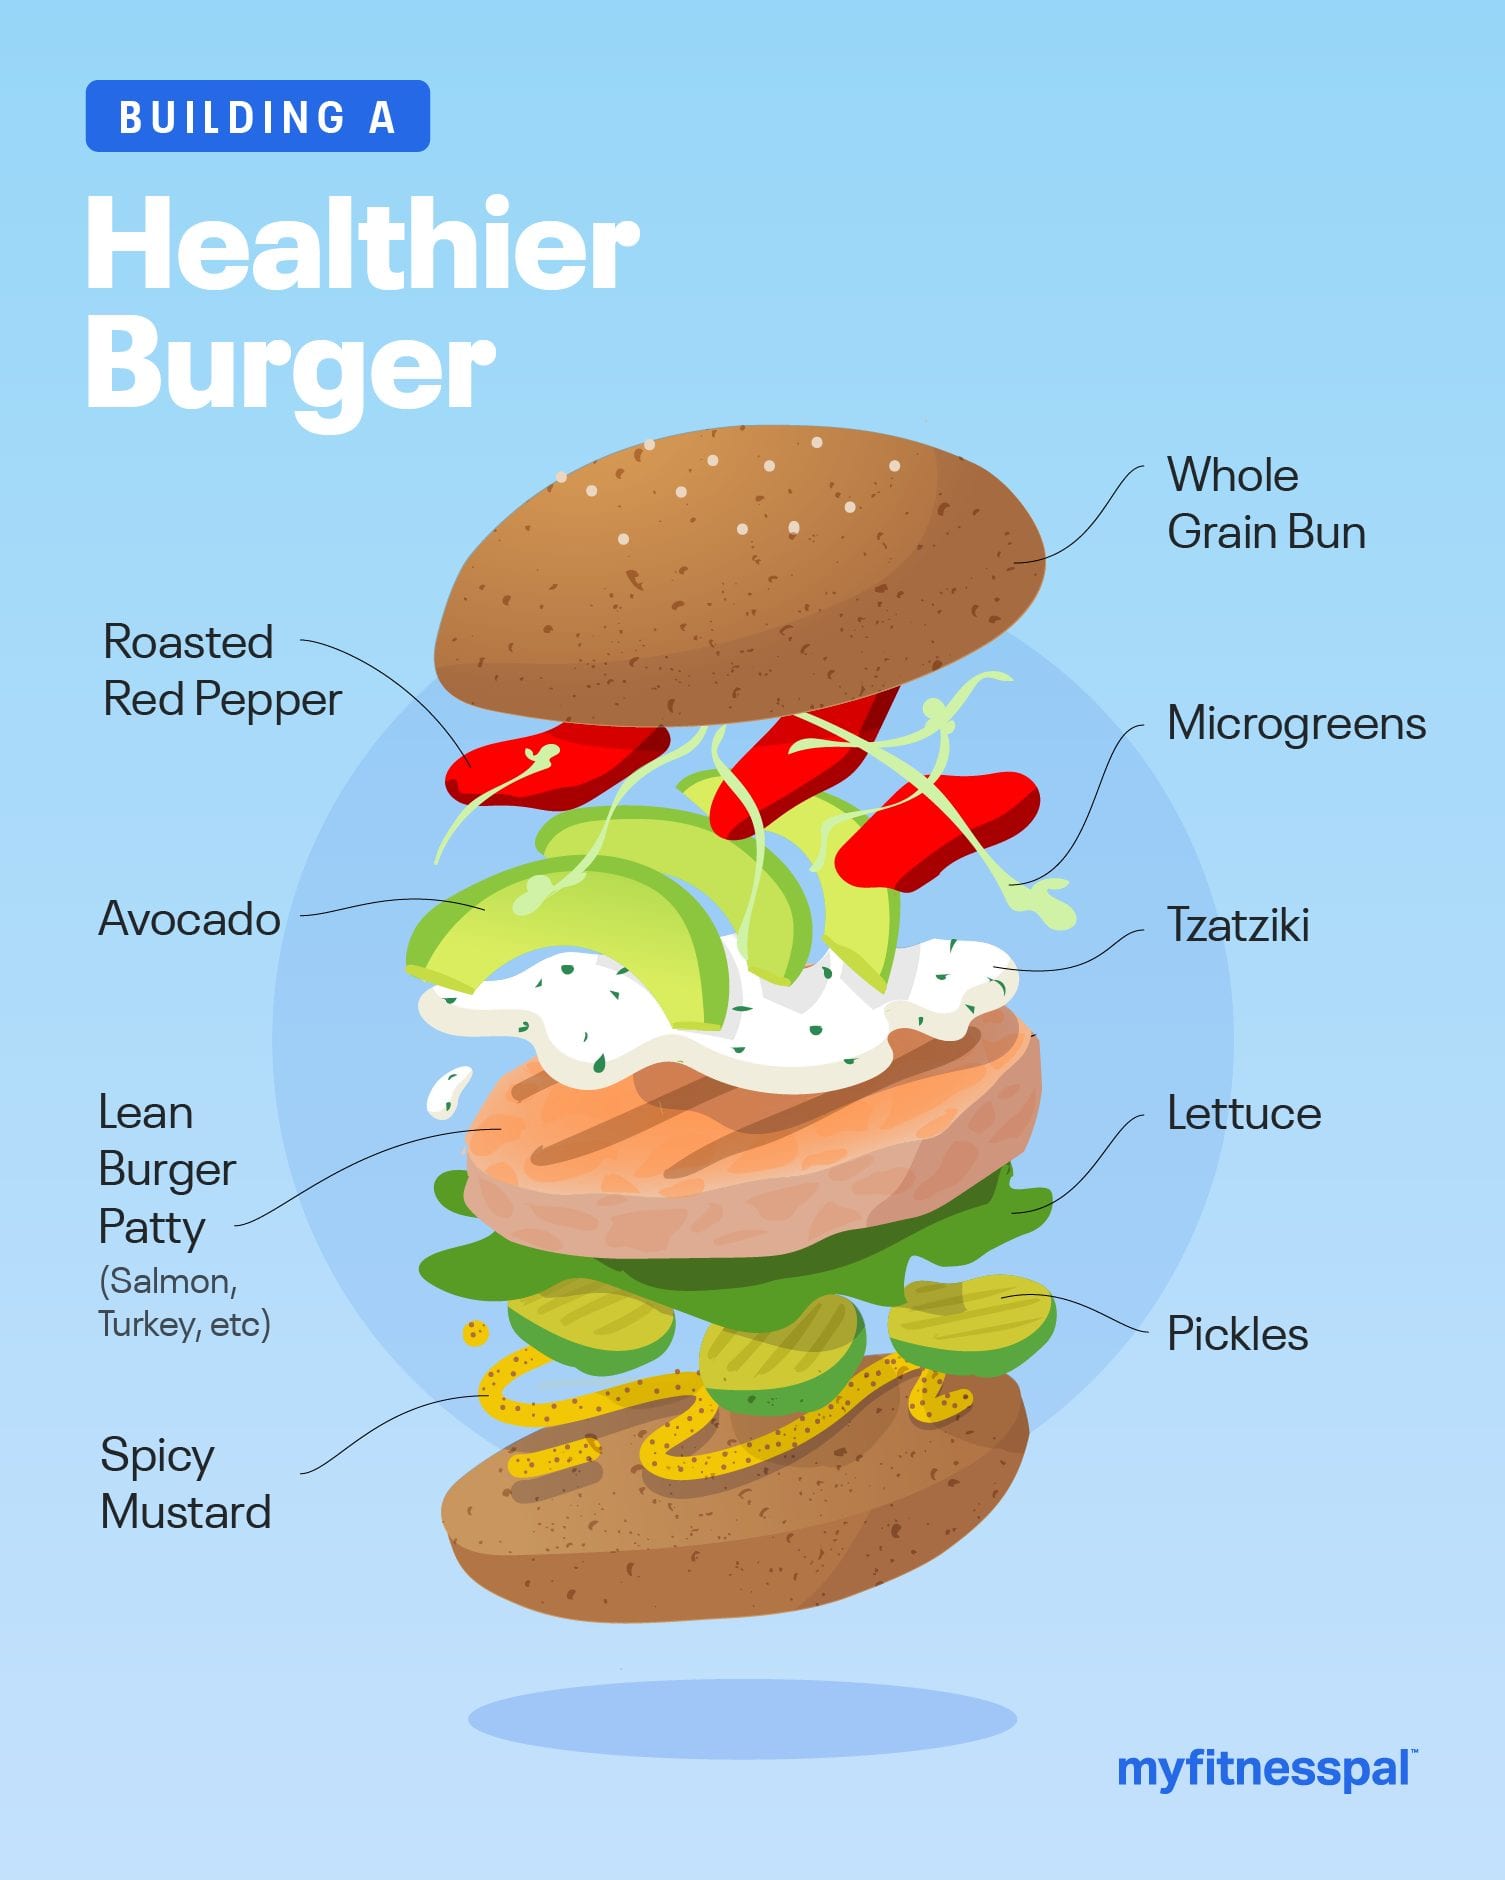 Dietitian-Approved Tips for Building a Healthier Burger